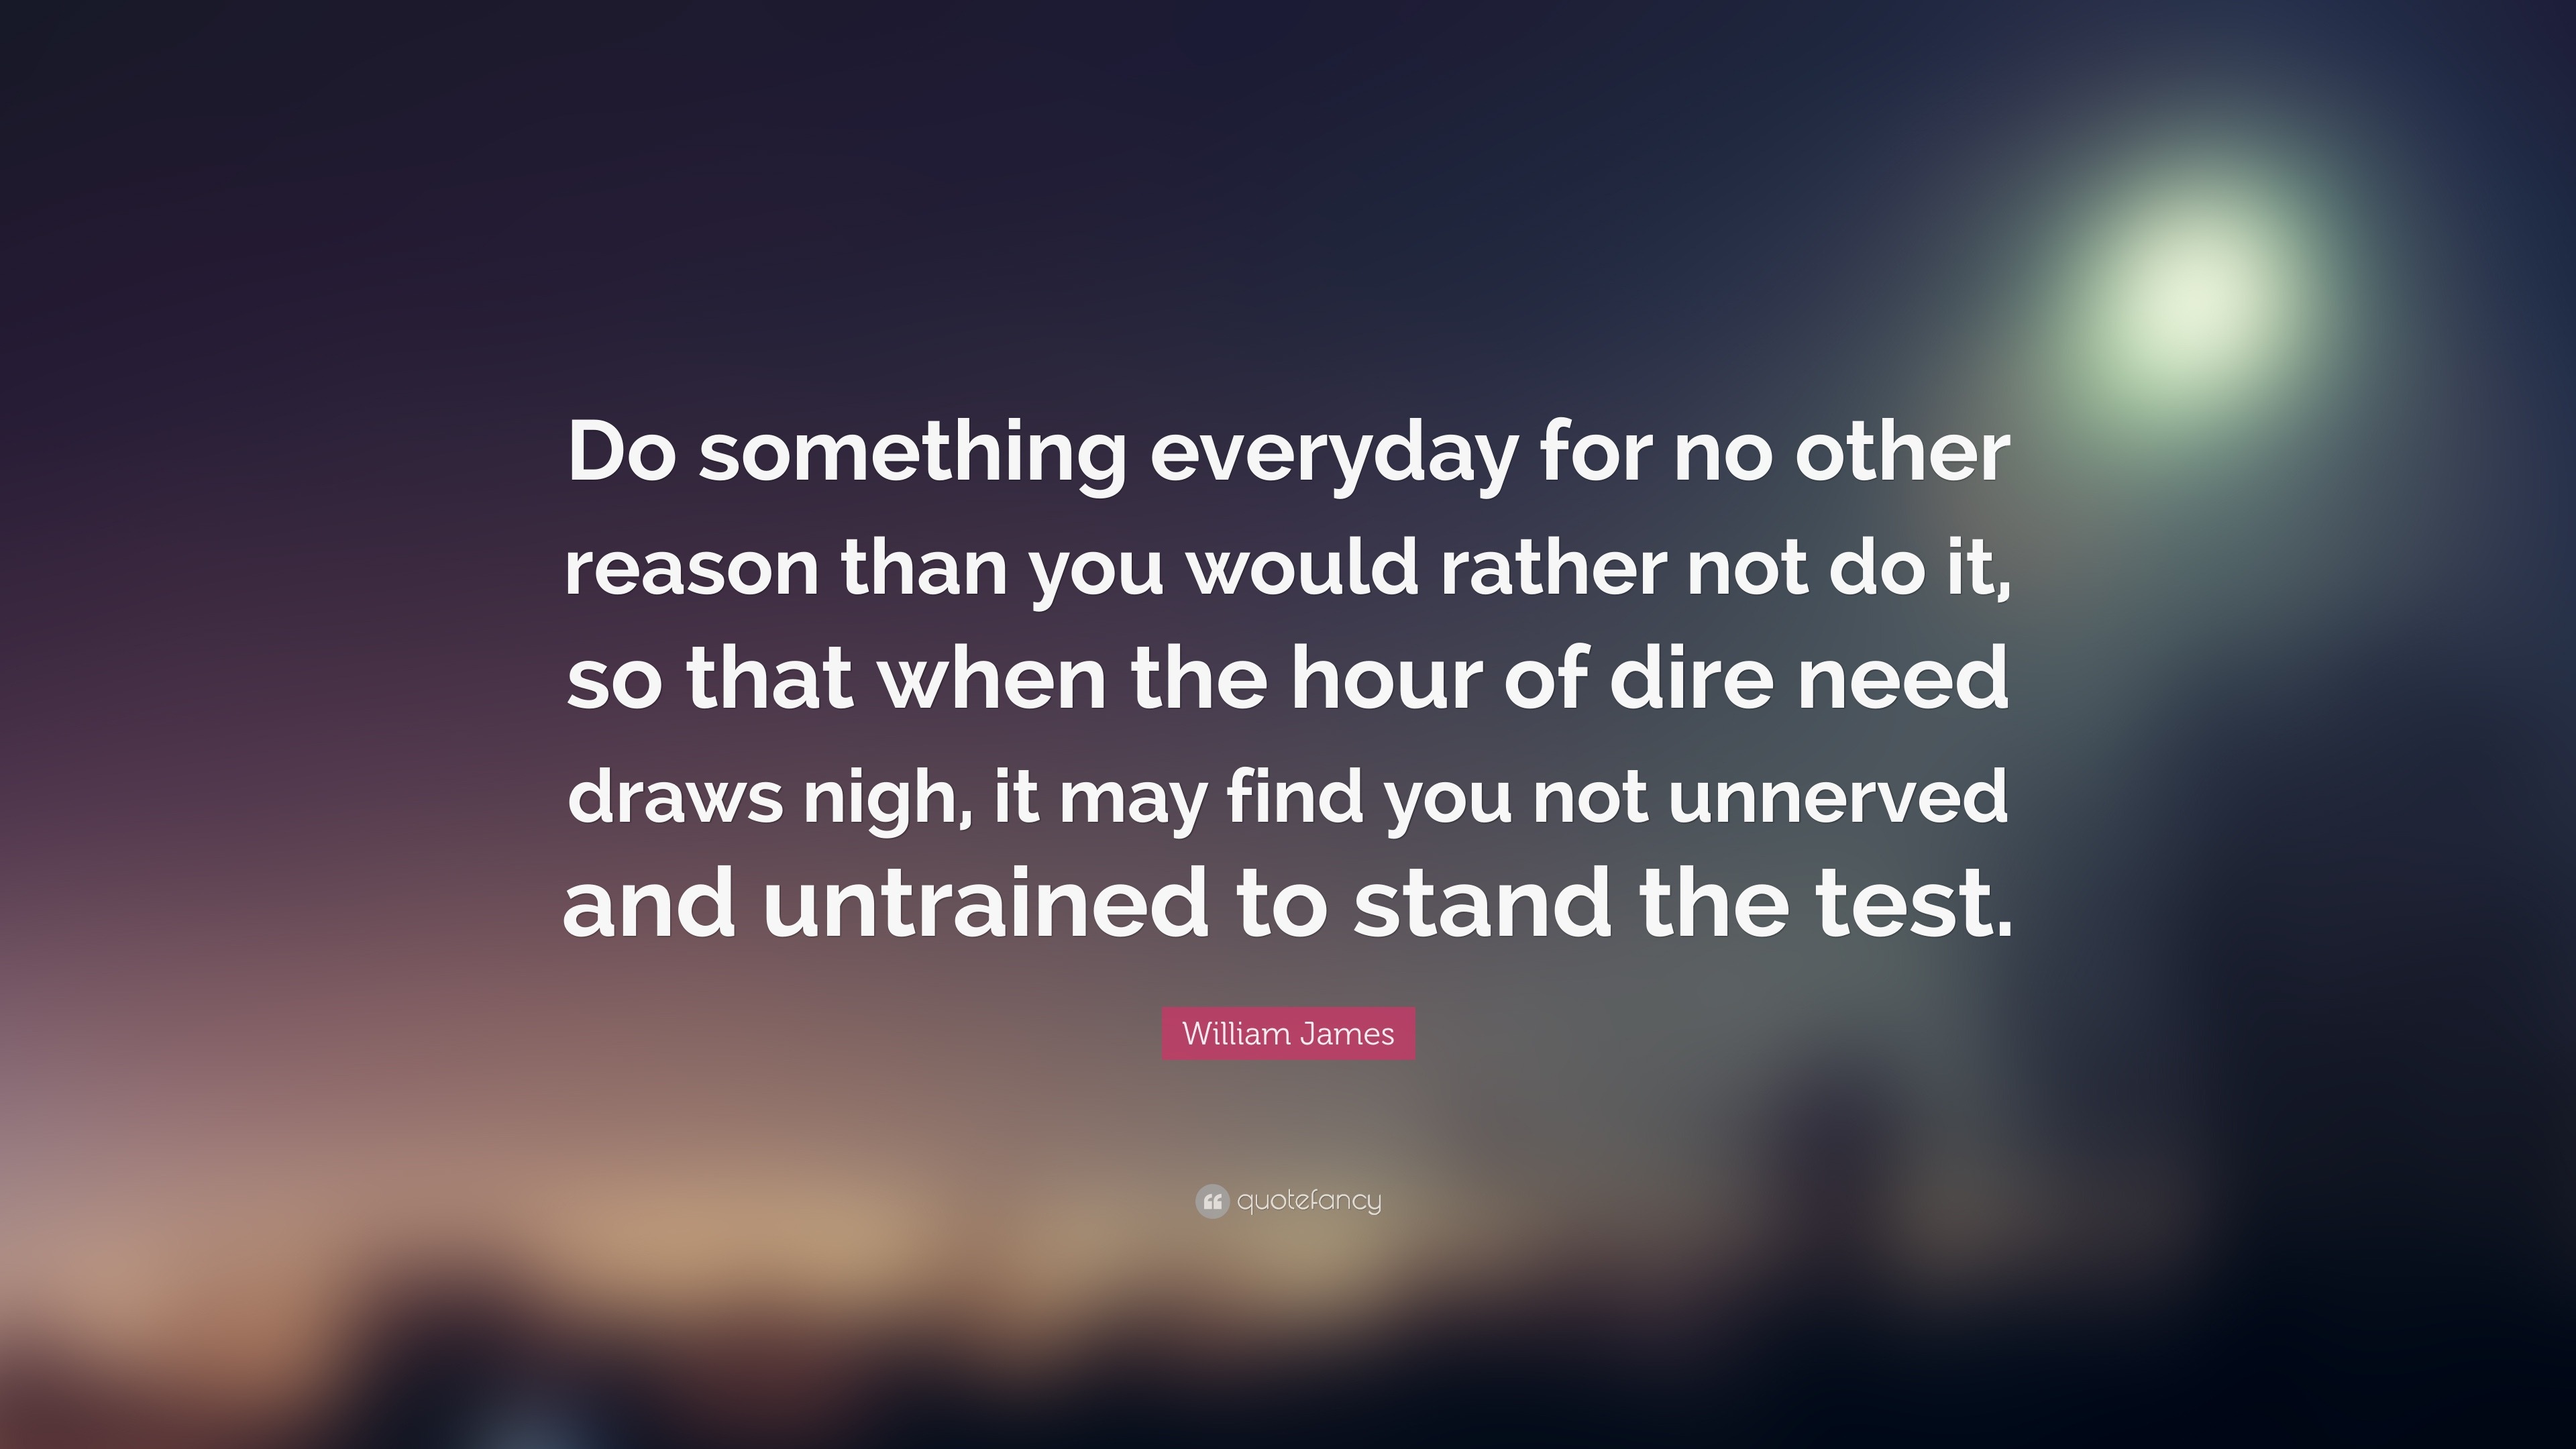 William James Quote: “Do something everyday for no other reason than ...